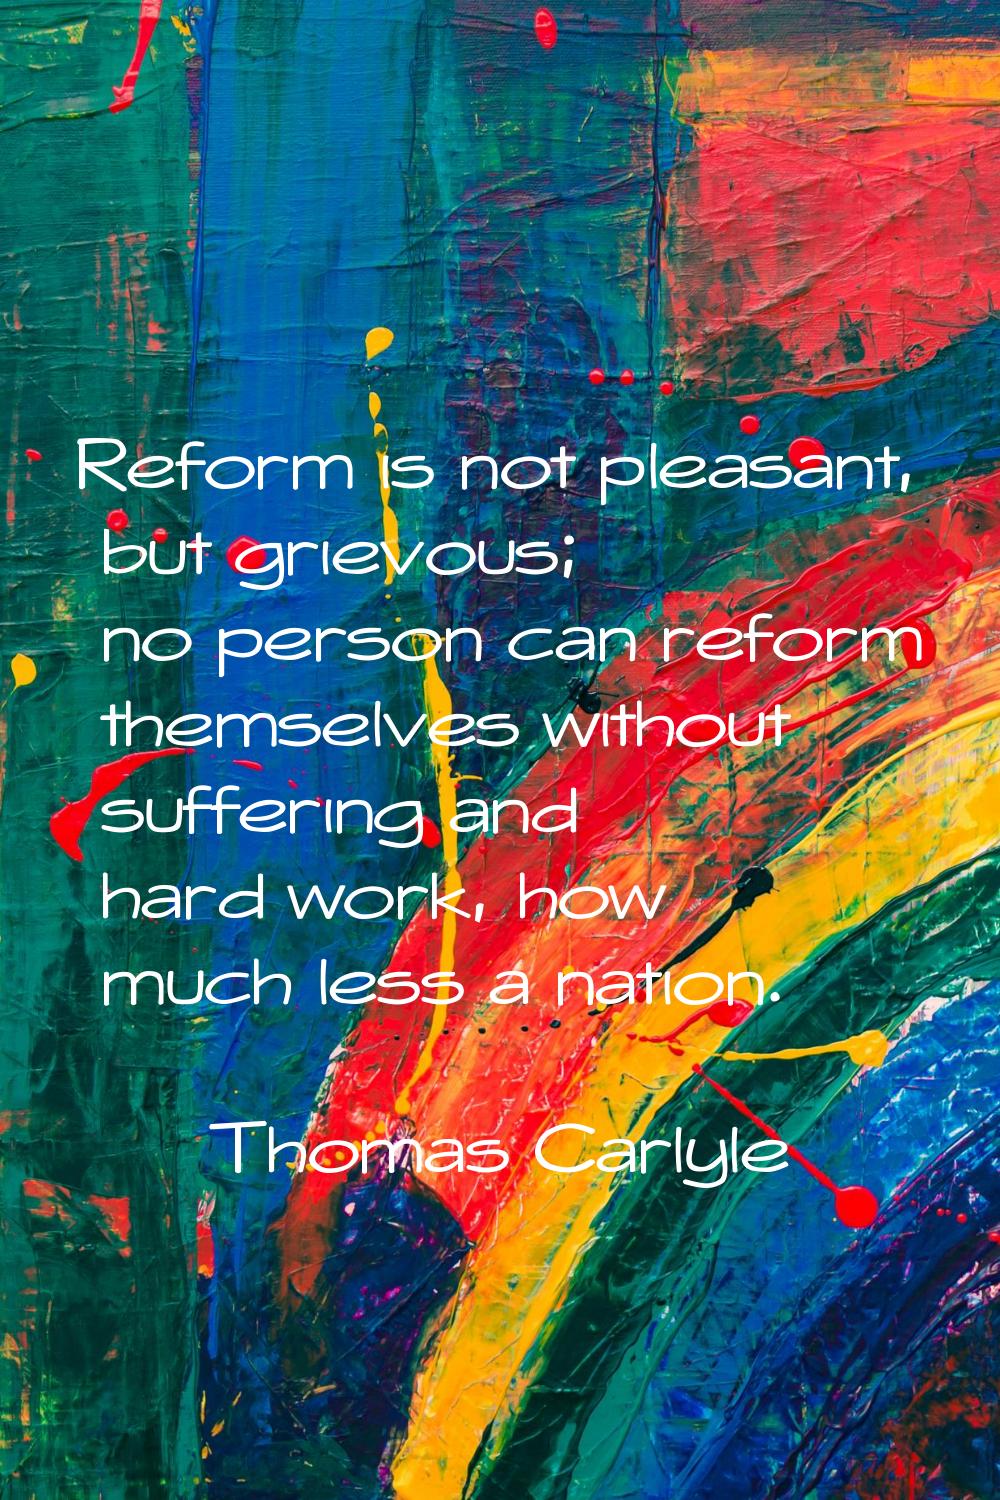 Reform is not pleasant, but grievous; no person can reform themselves without suffering and hard wo